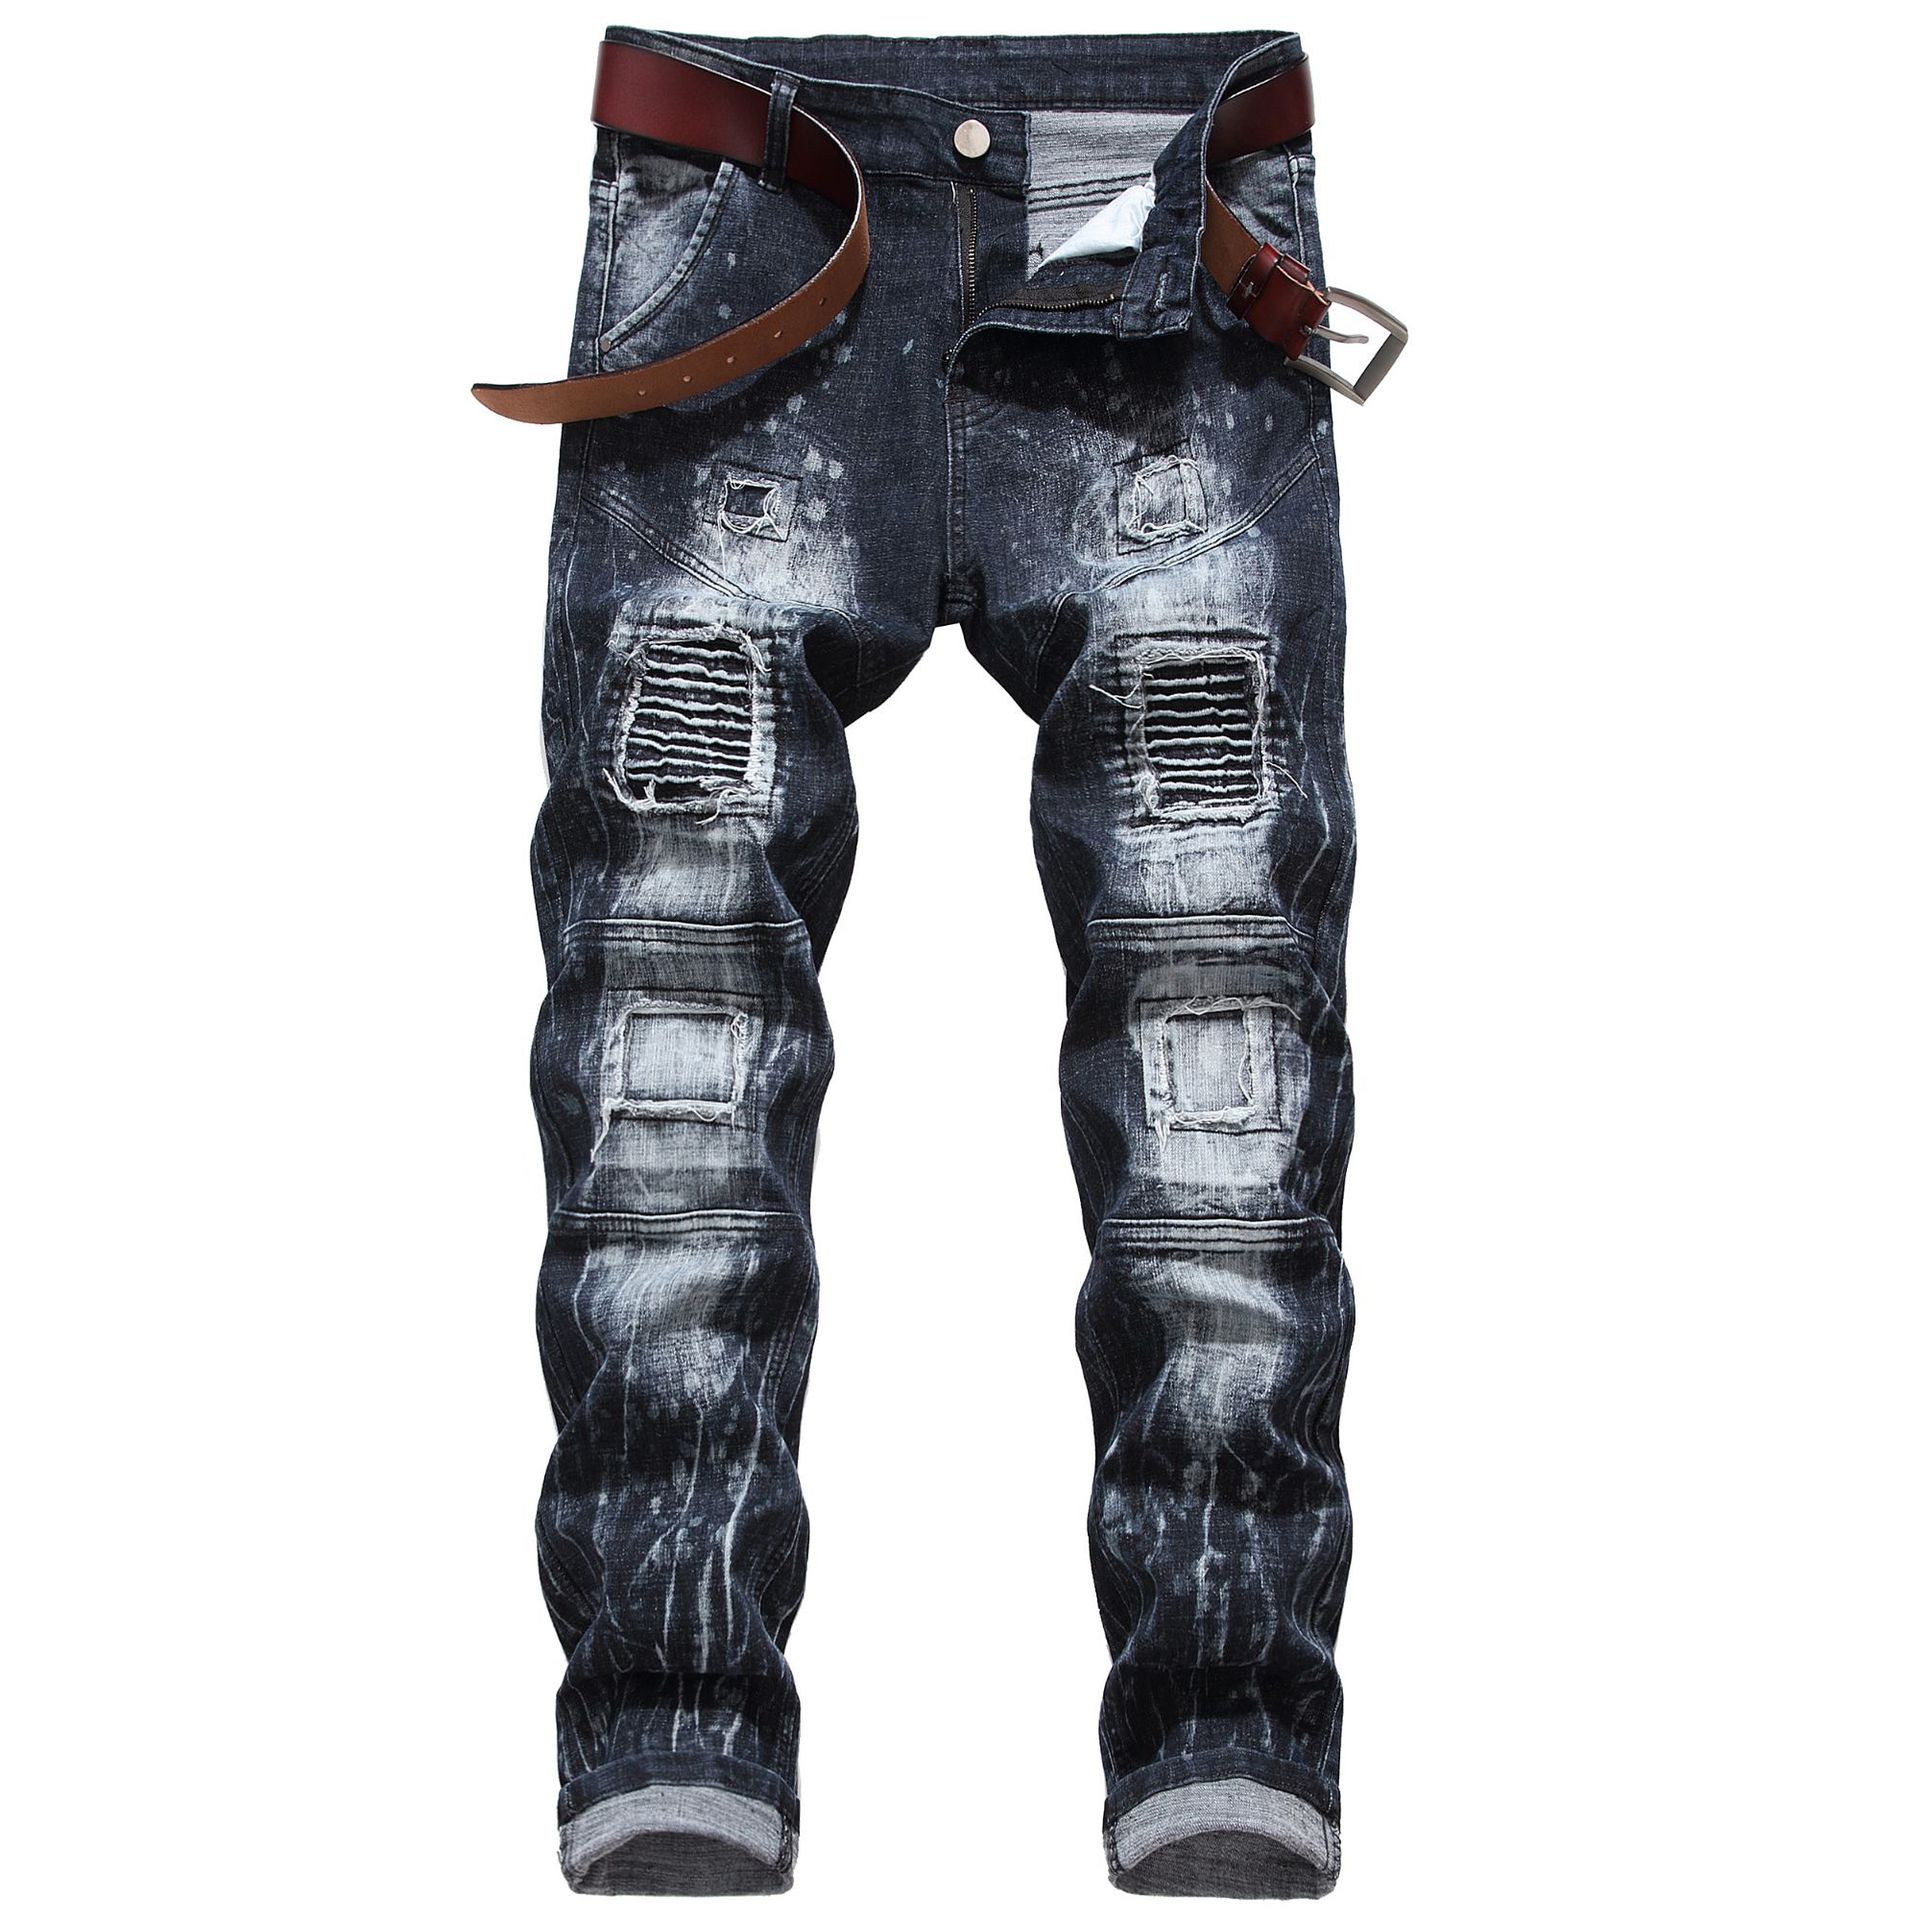 Cross-Border Supply Men's Stretch Black Jeans Motorcycle Miscellaneous Stitching Men's Jeans Denim Trousers